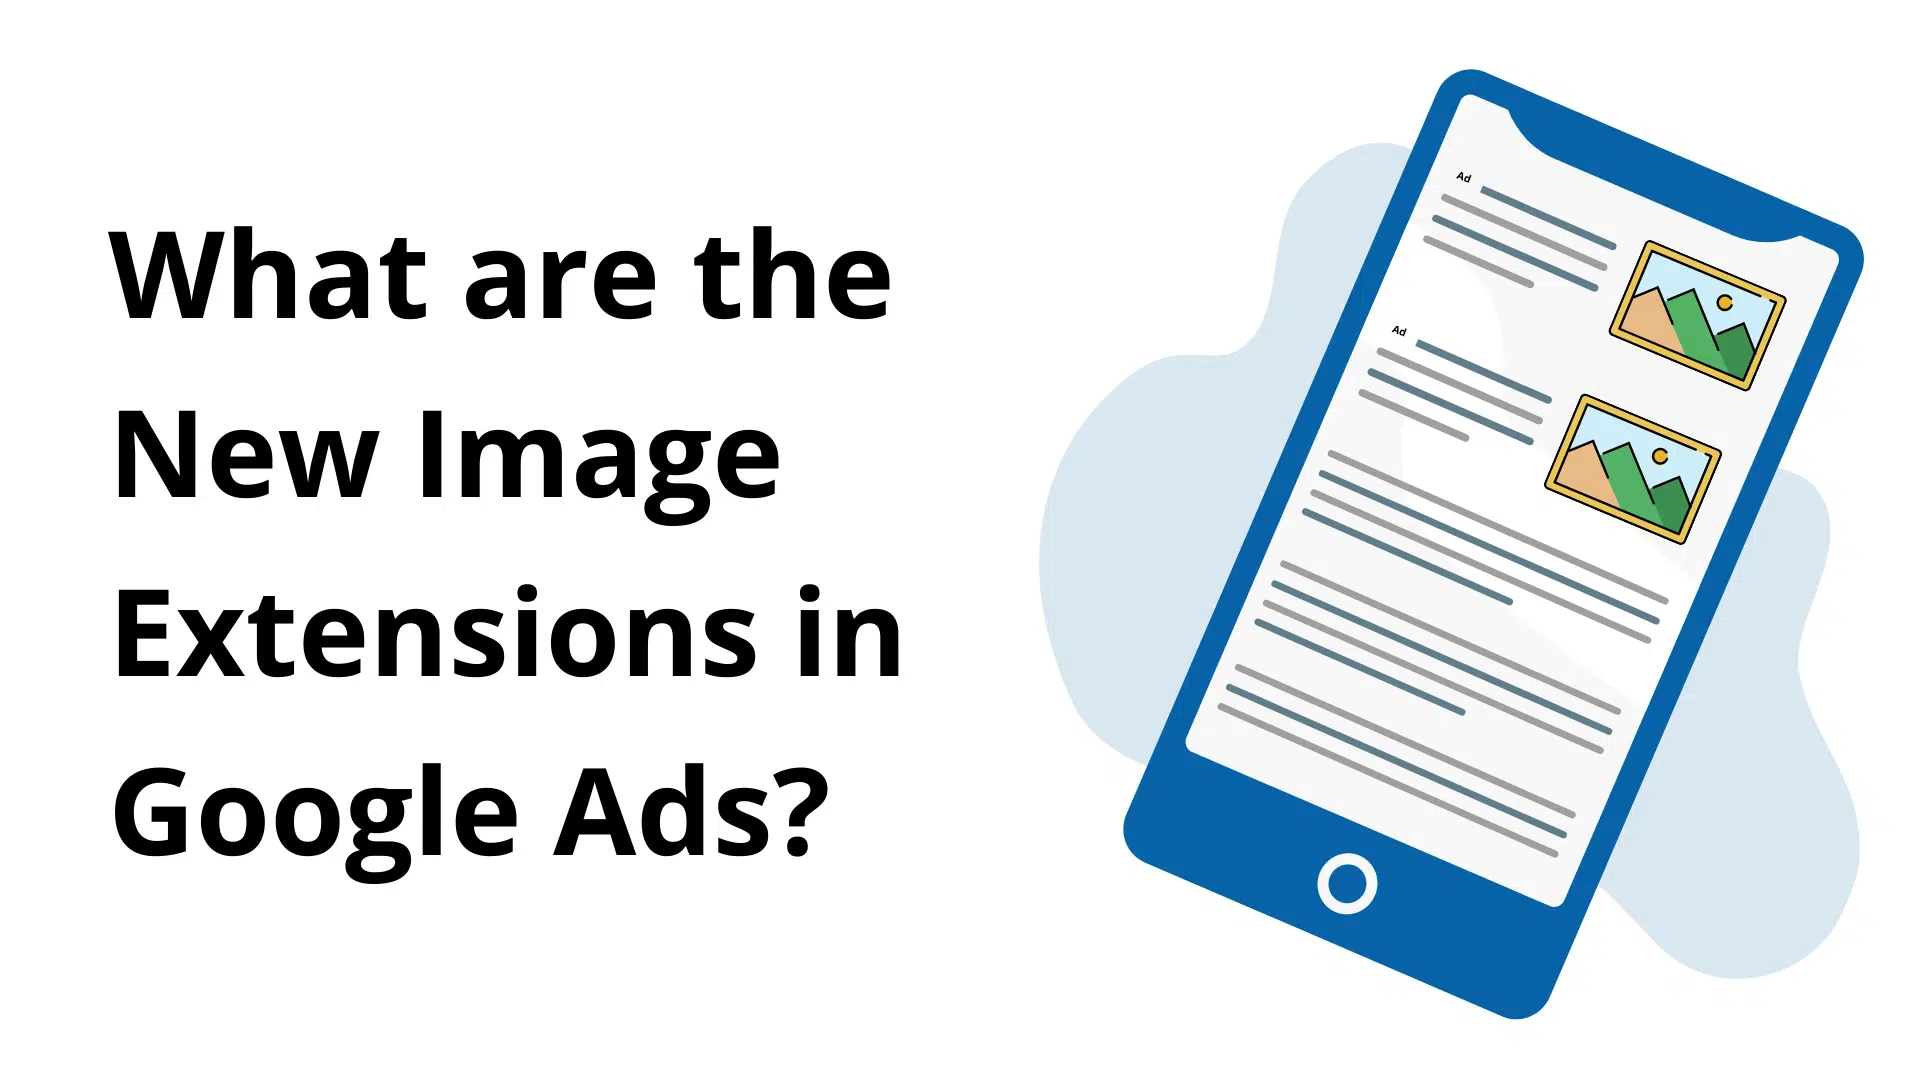 image extensions google ads